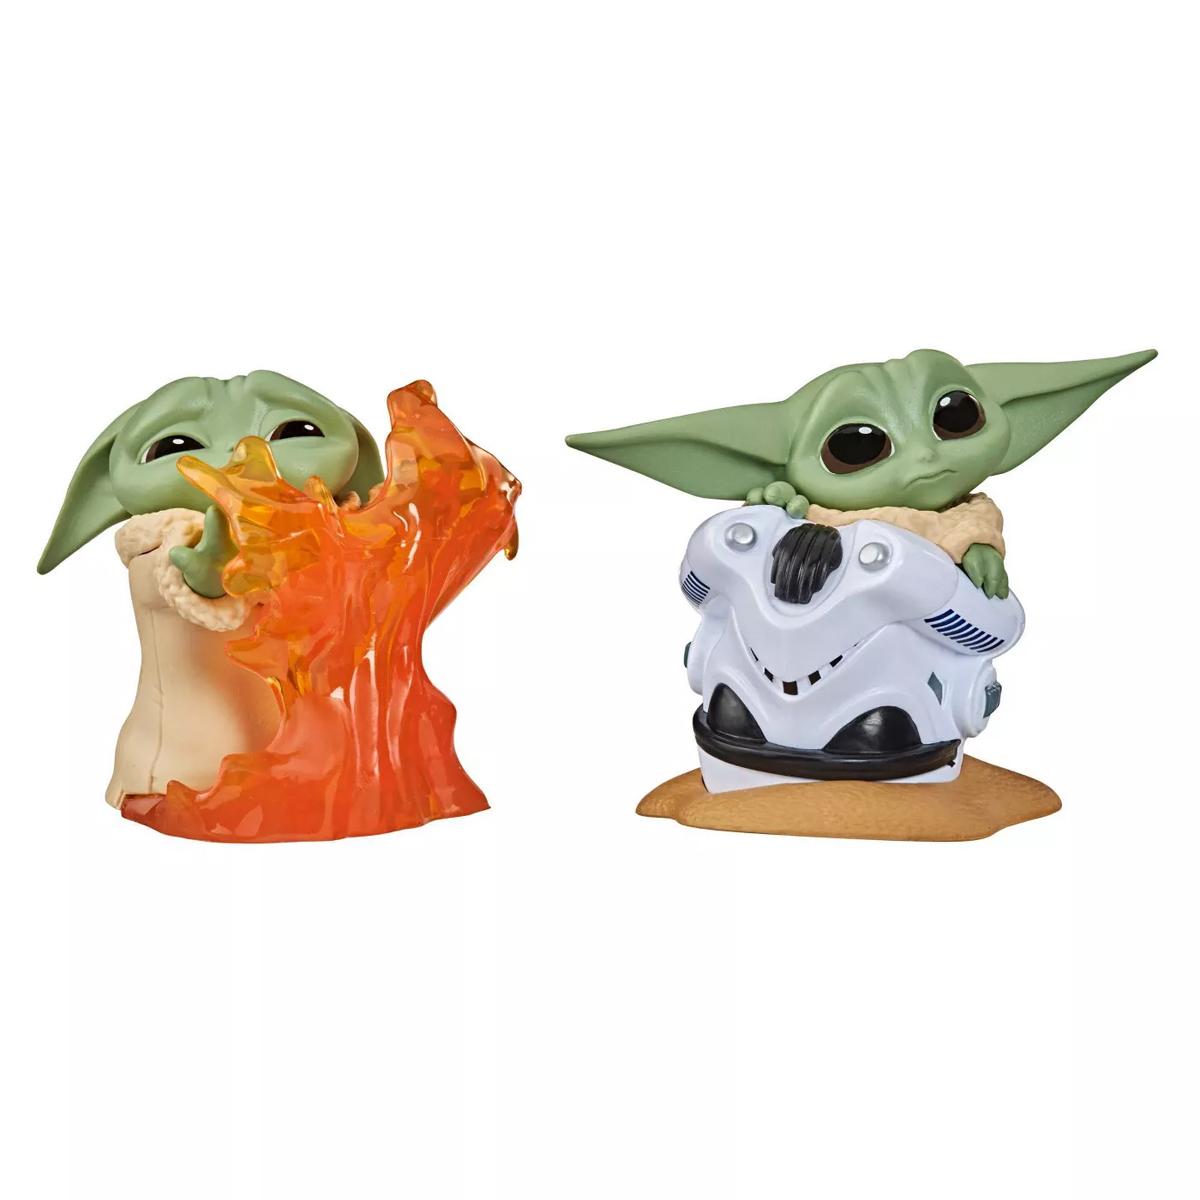 Star Wars The Bounty Collection Series 2 The Child Figures for $7.99